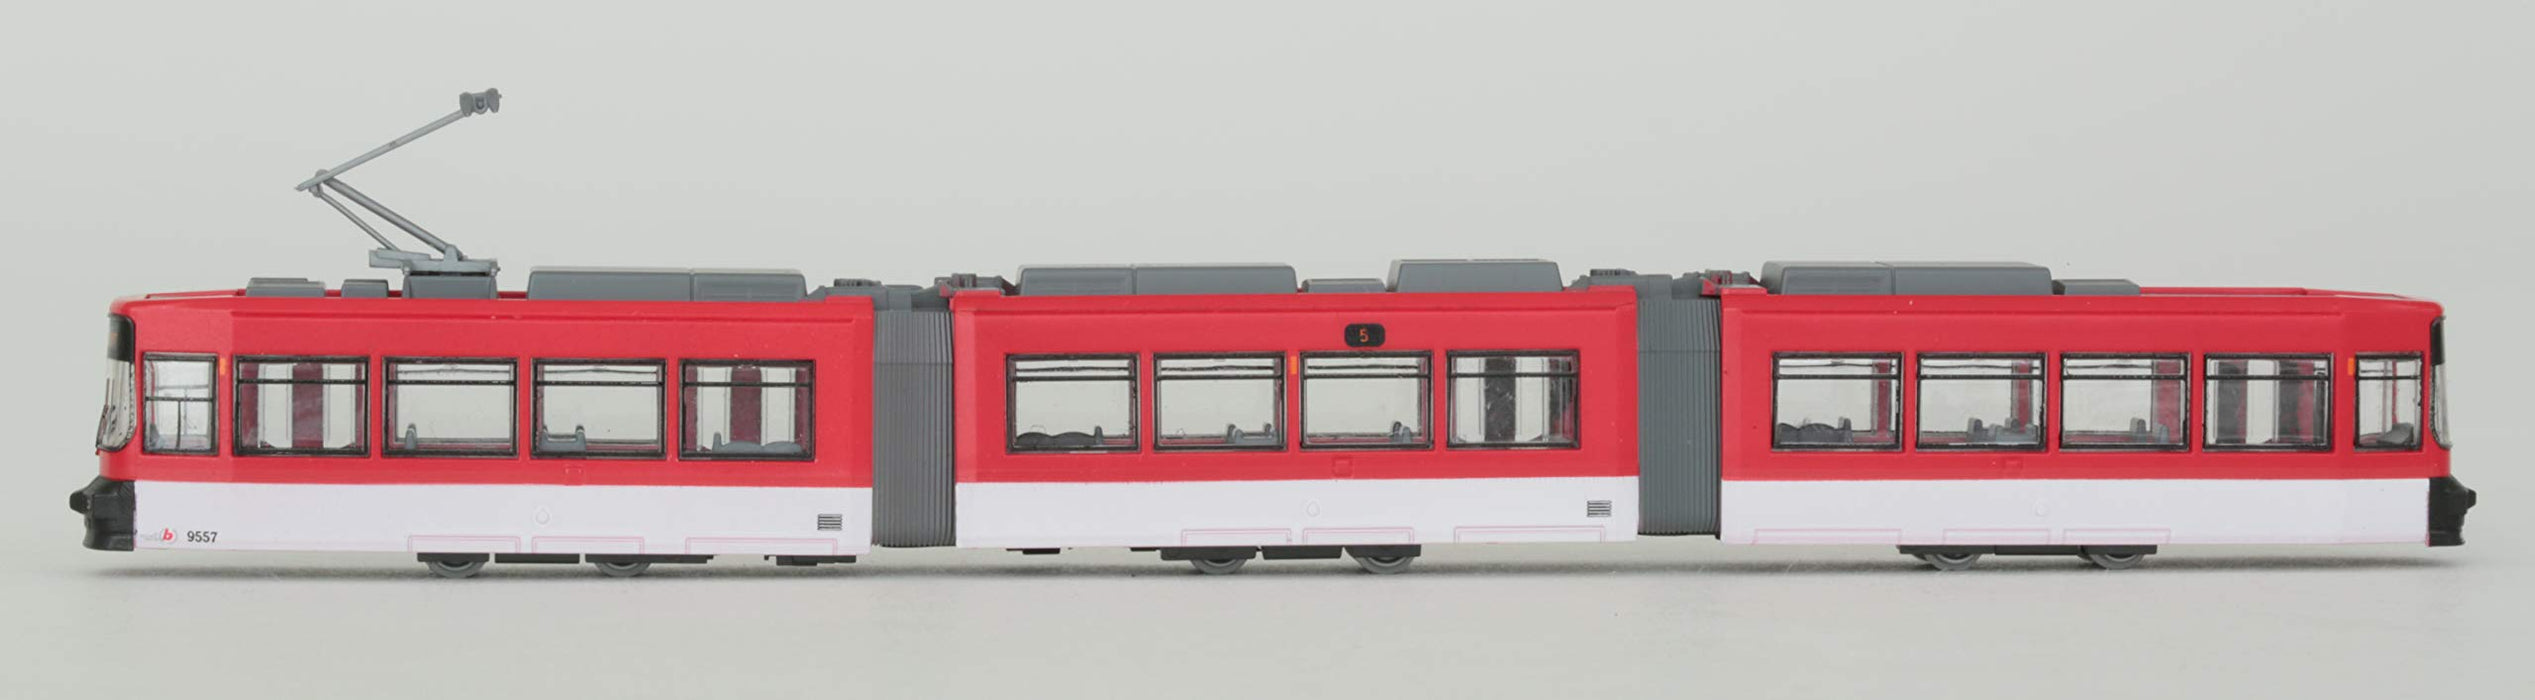 Tomytec Railway Model - Gt6S Type Iron Collection Braunschweigtrum Limited Edition